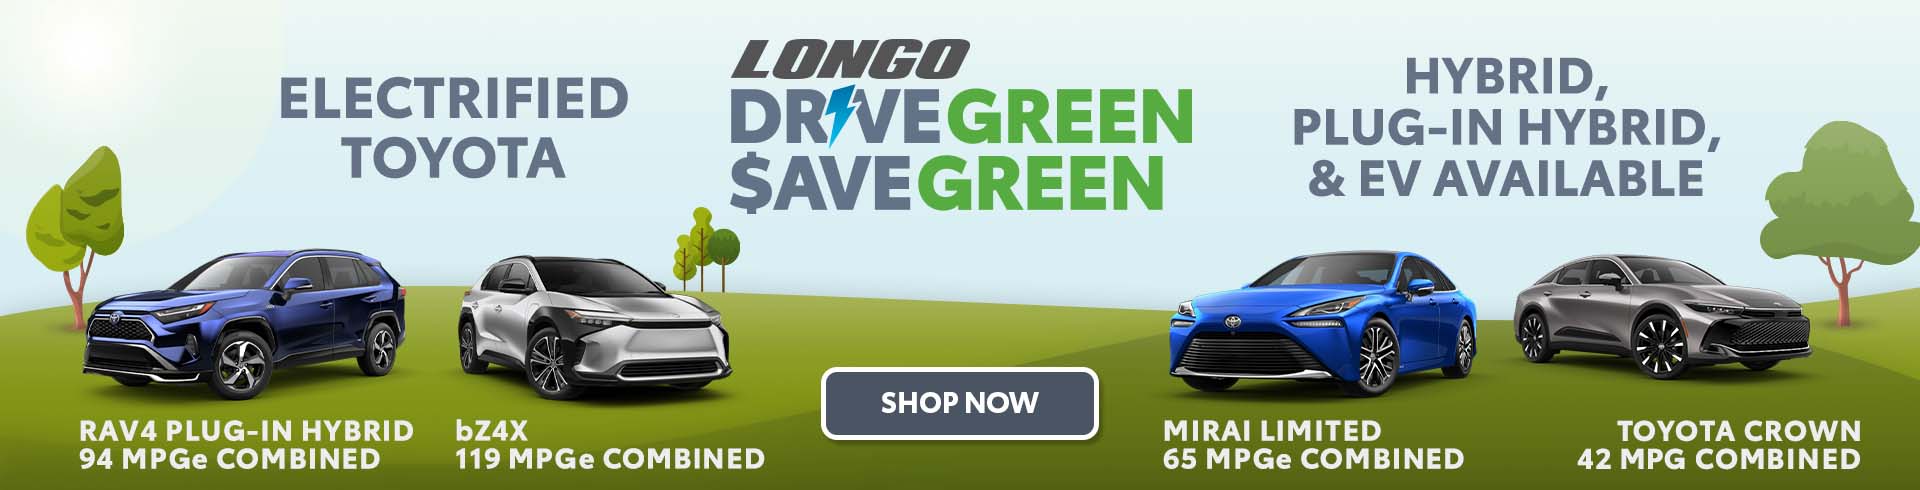 The Drive Green, Save Green Sales Event Is Going on Now